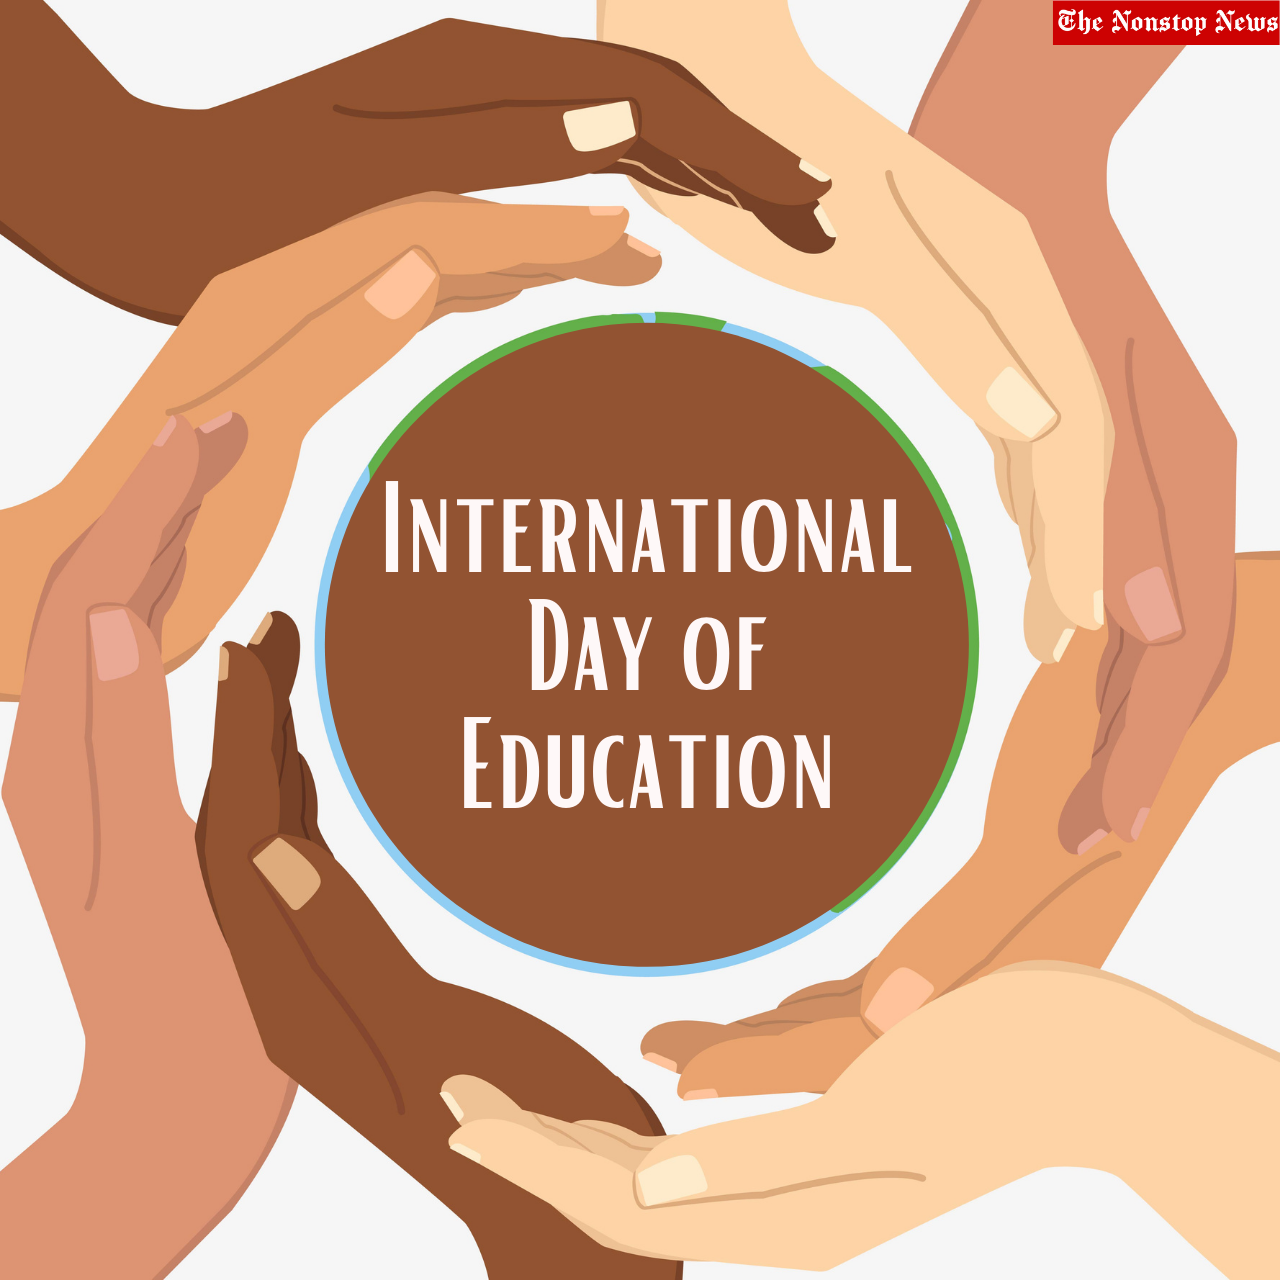 International Day of Education 2022 Wishes, Quotes, HD Images, Messages, Slogans to Share